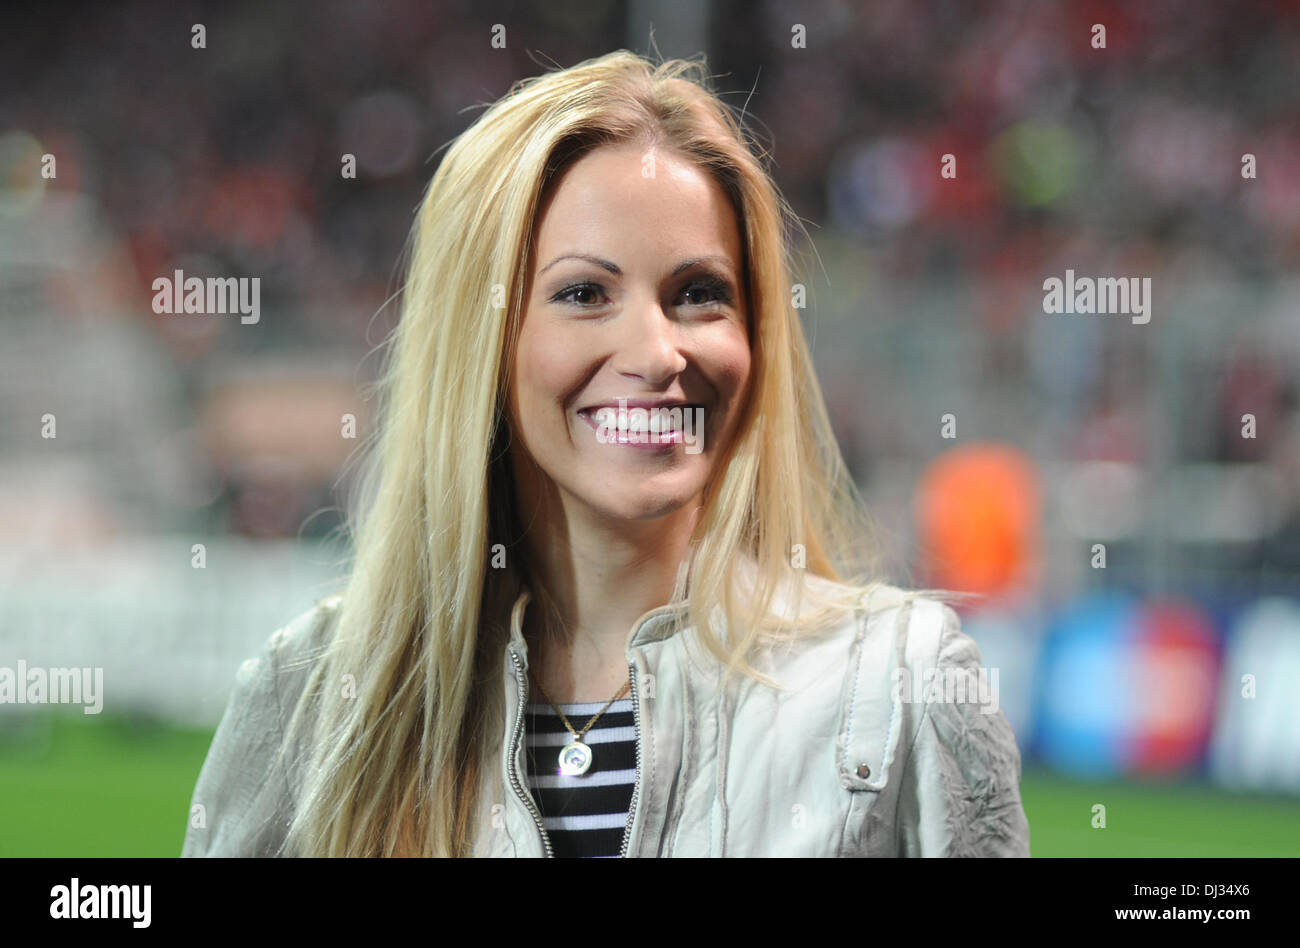 Munich, Germany. 03rd April, 2012. Sky TV presenter Andrea Kaiser during an  interview before the Champions League quarter final second leg soccer match  between FC Bayern Munich and Olympique Marseille at the